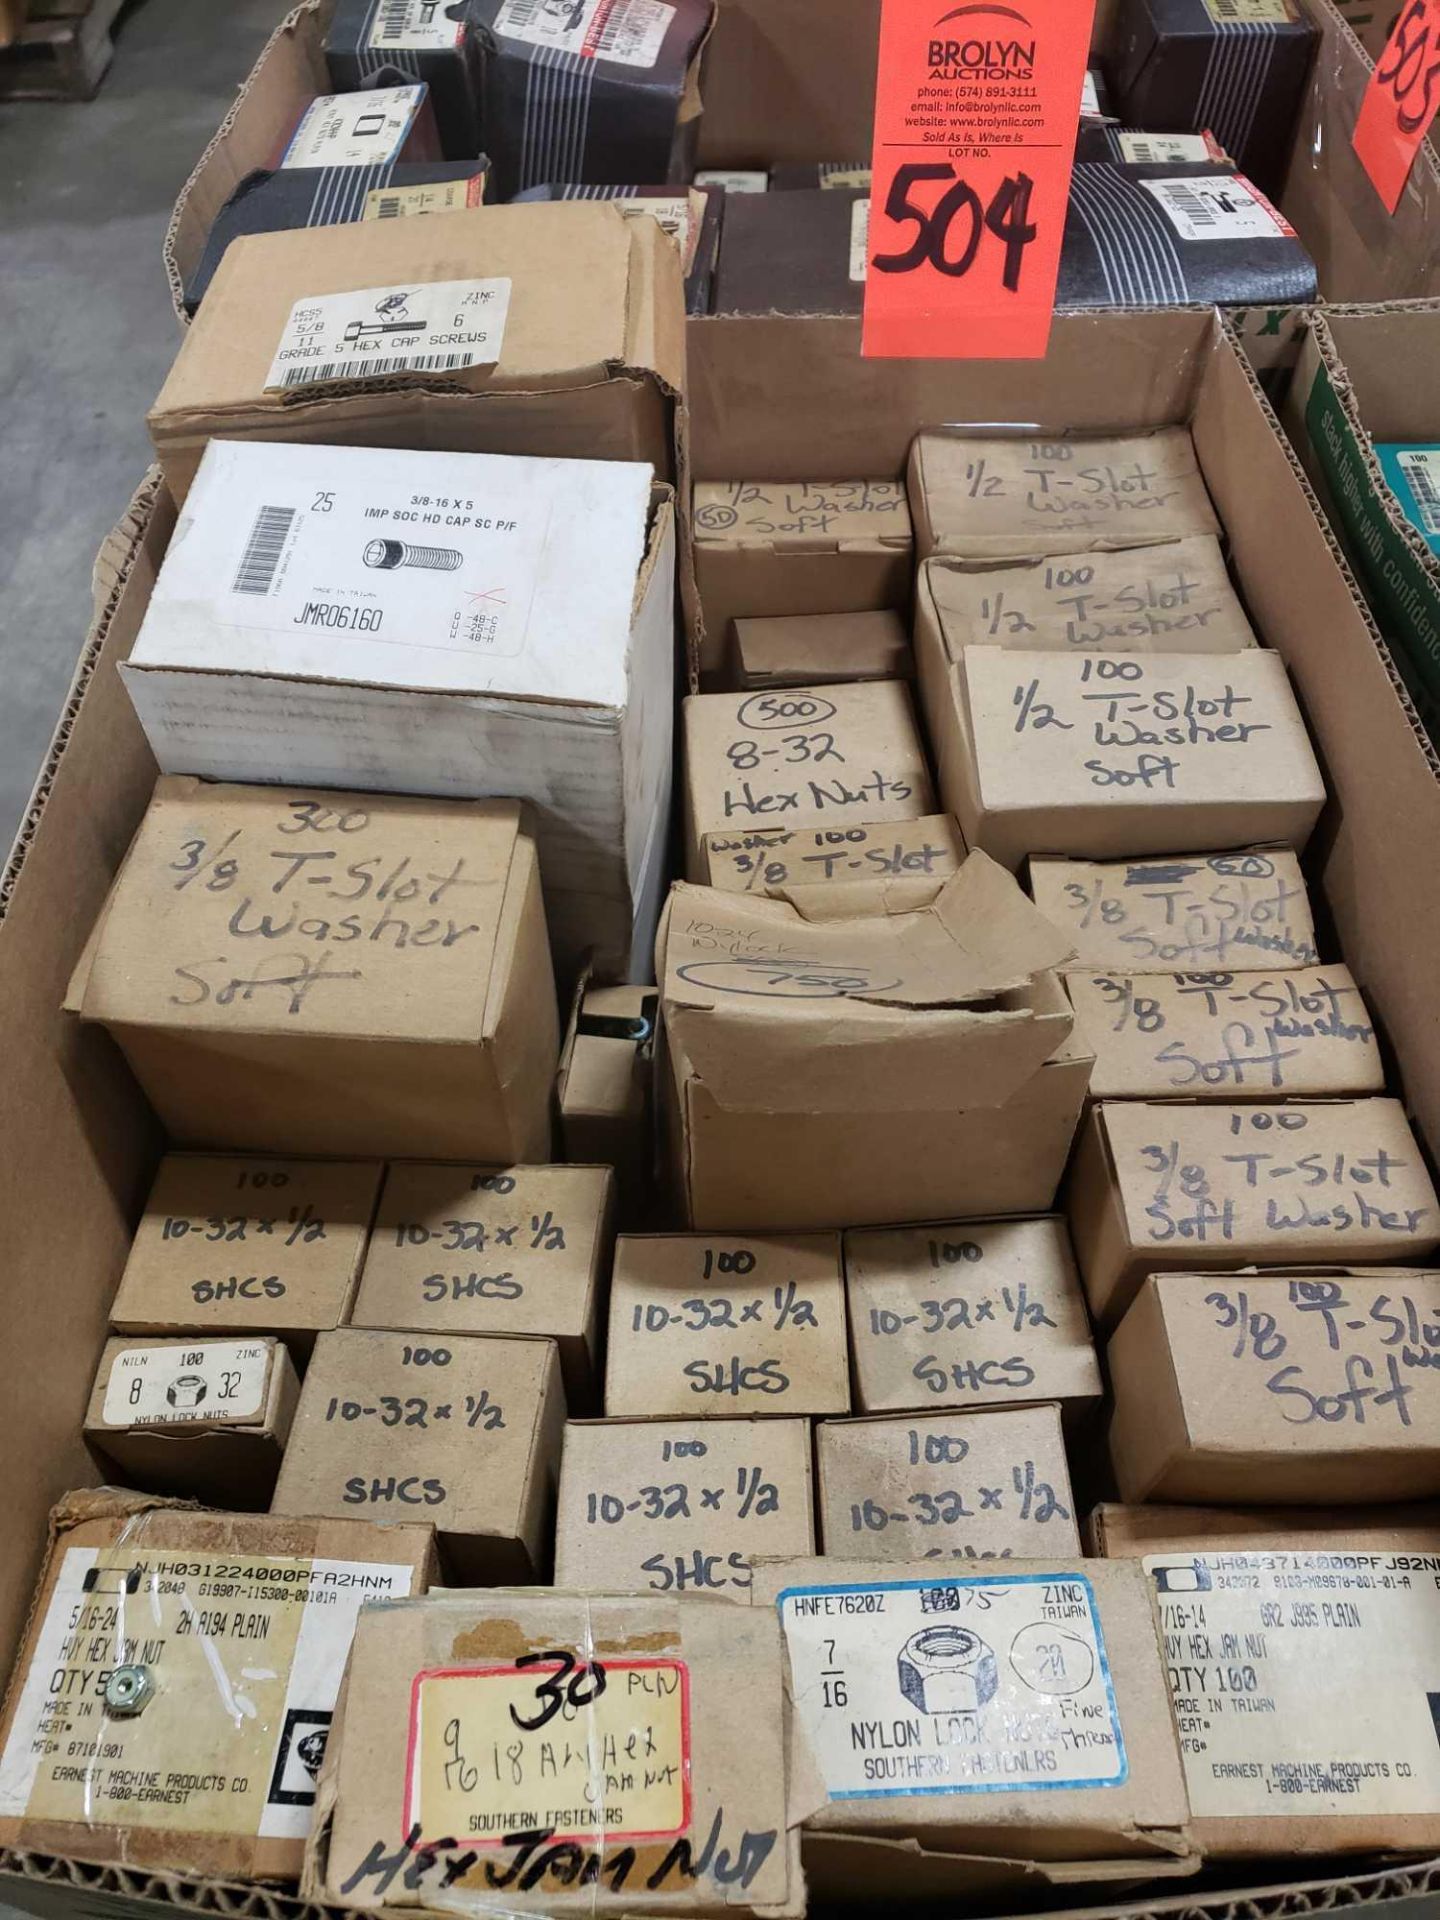 Qty 28 - Assorted boxes of new hardware, high grade, nuts, bolts, washers, etc. New in box.